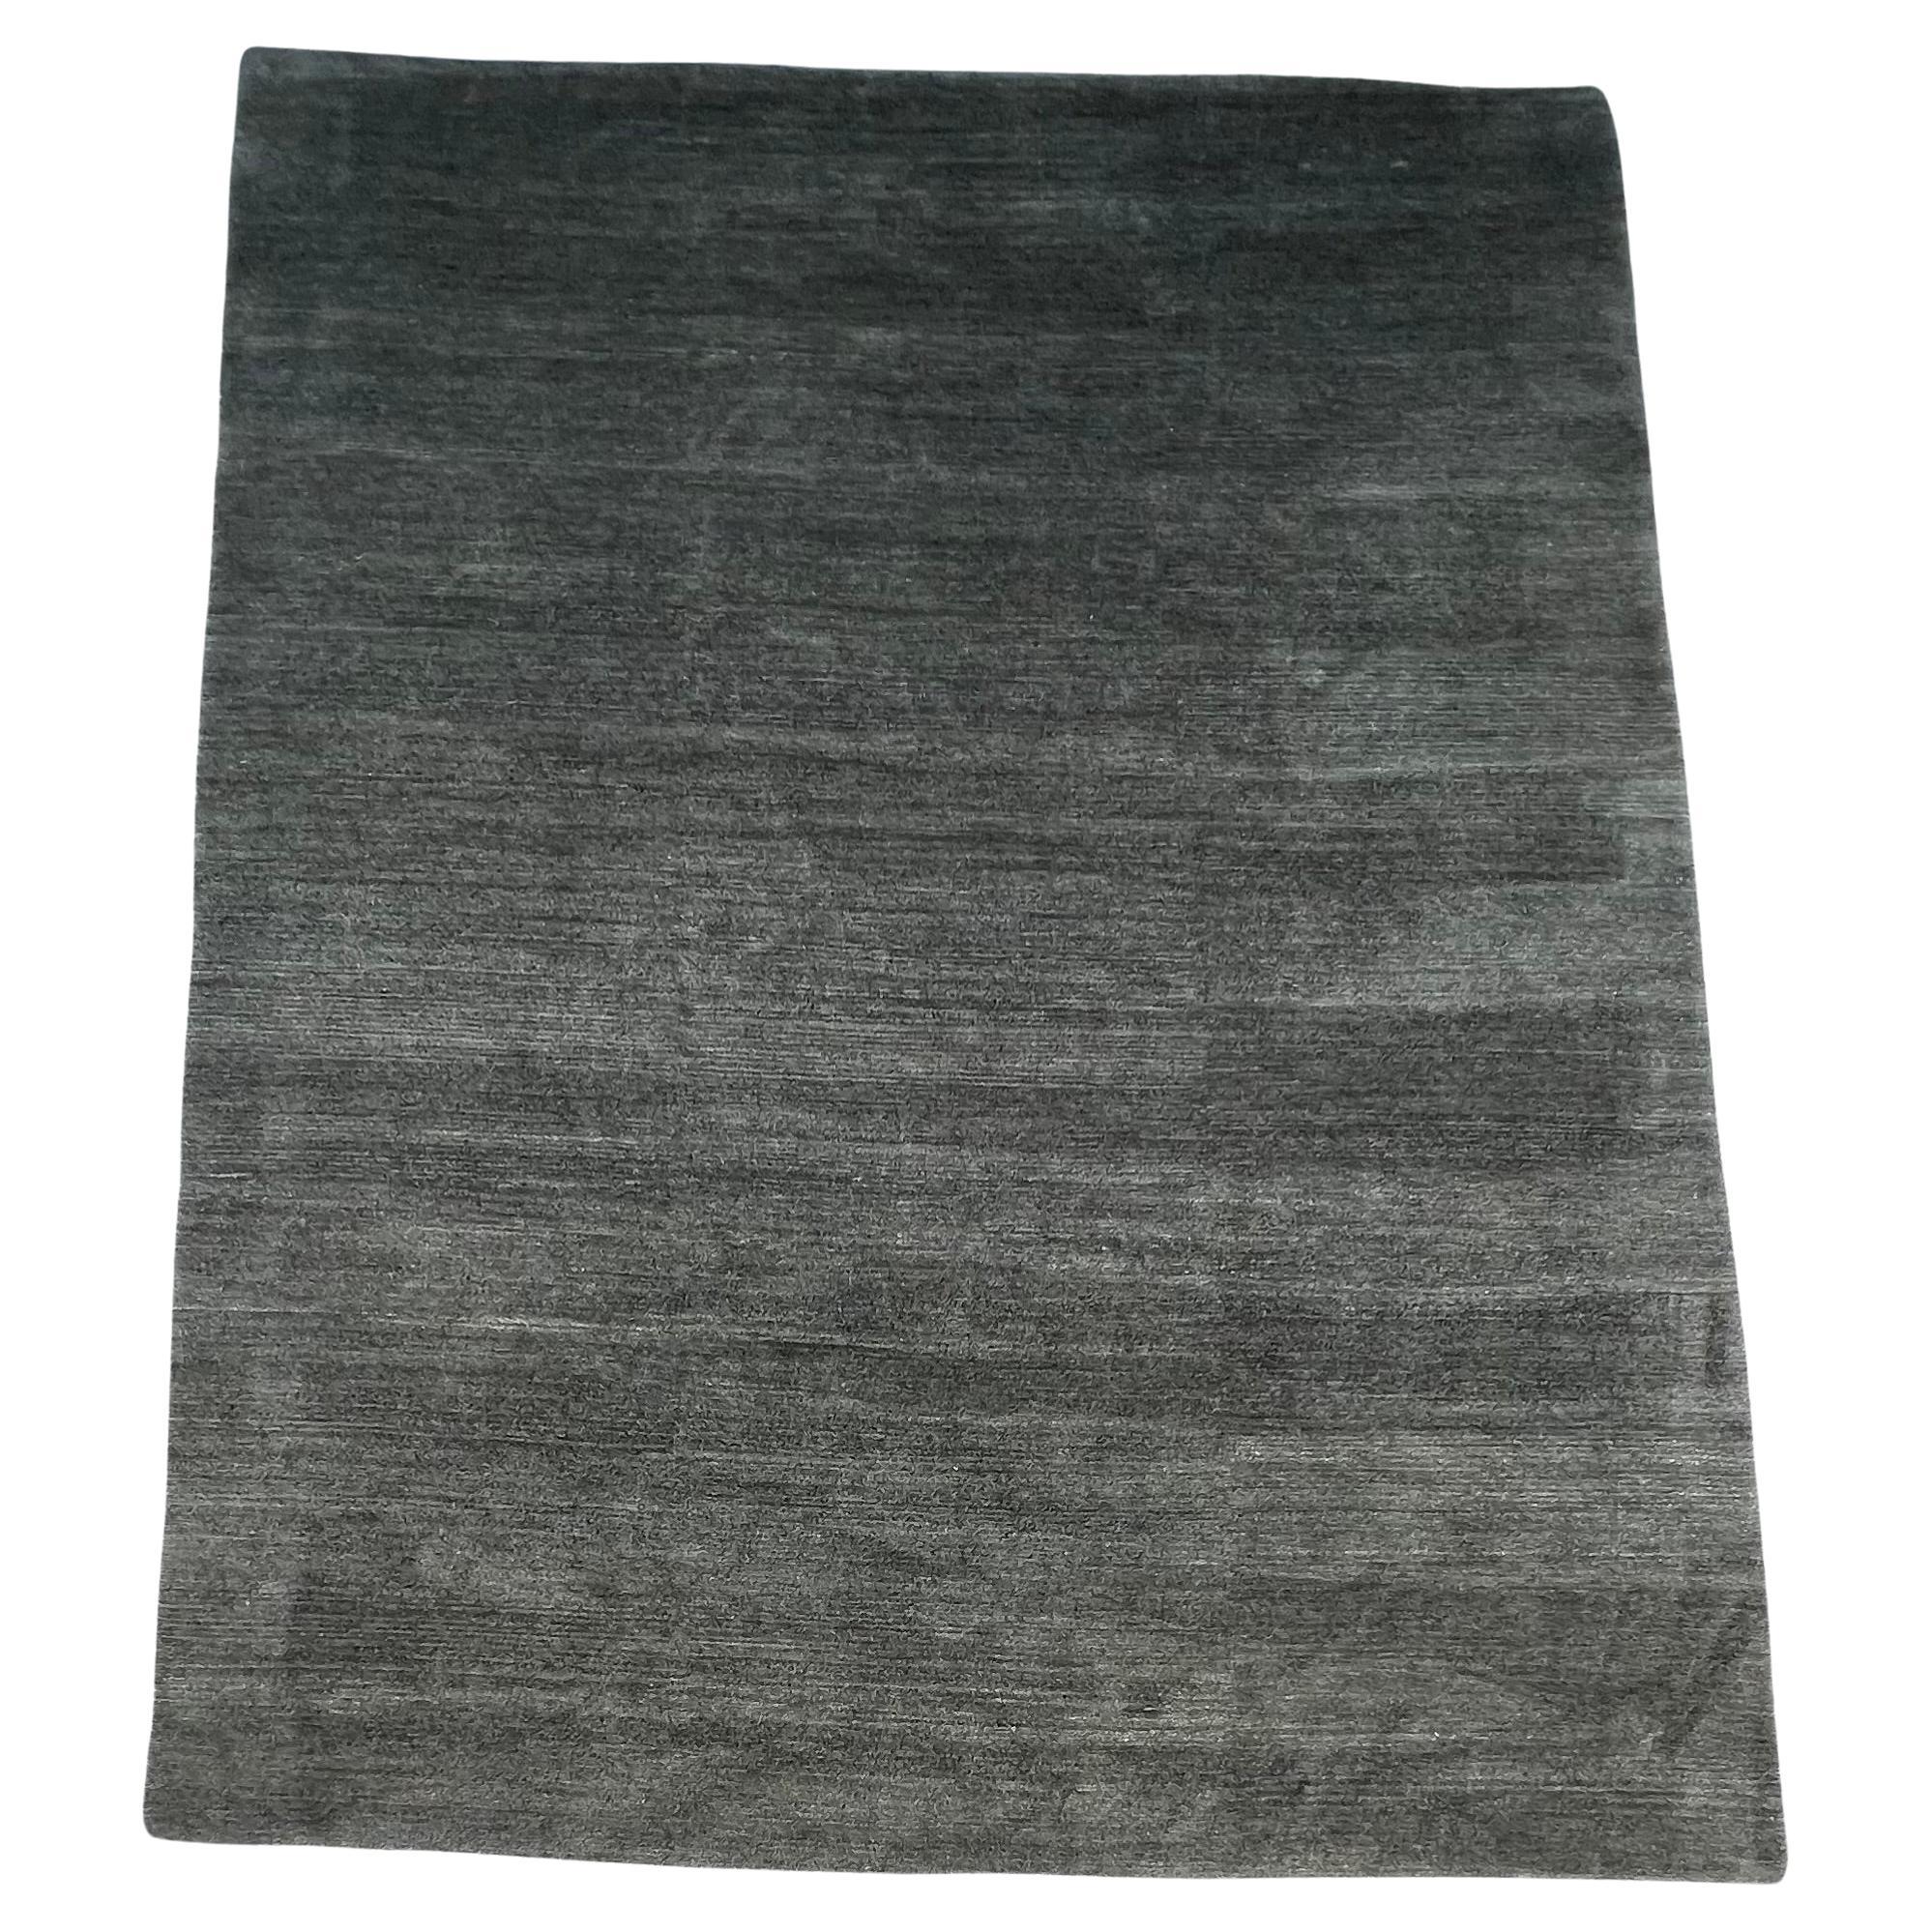 Hand woven Tibetan modern  rug fits in with any style.  Simple design says oriental yet 